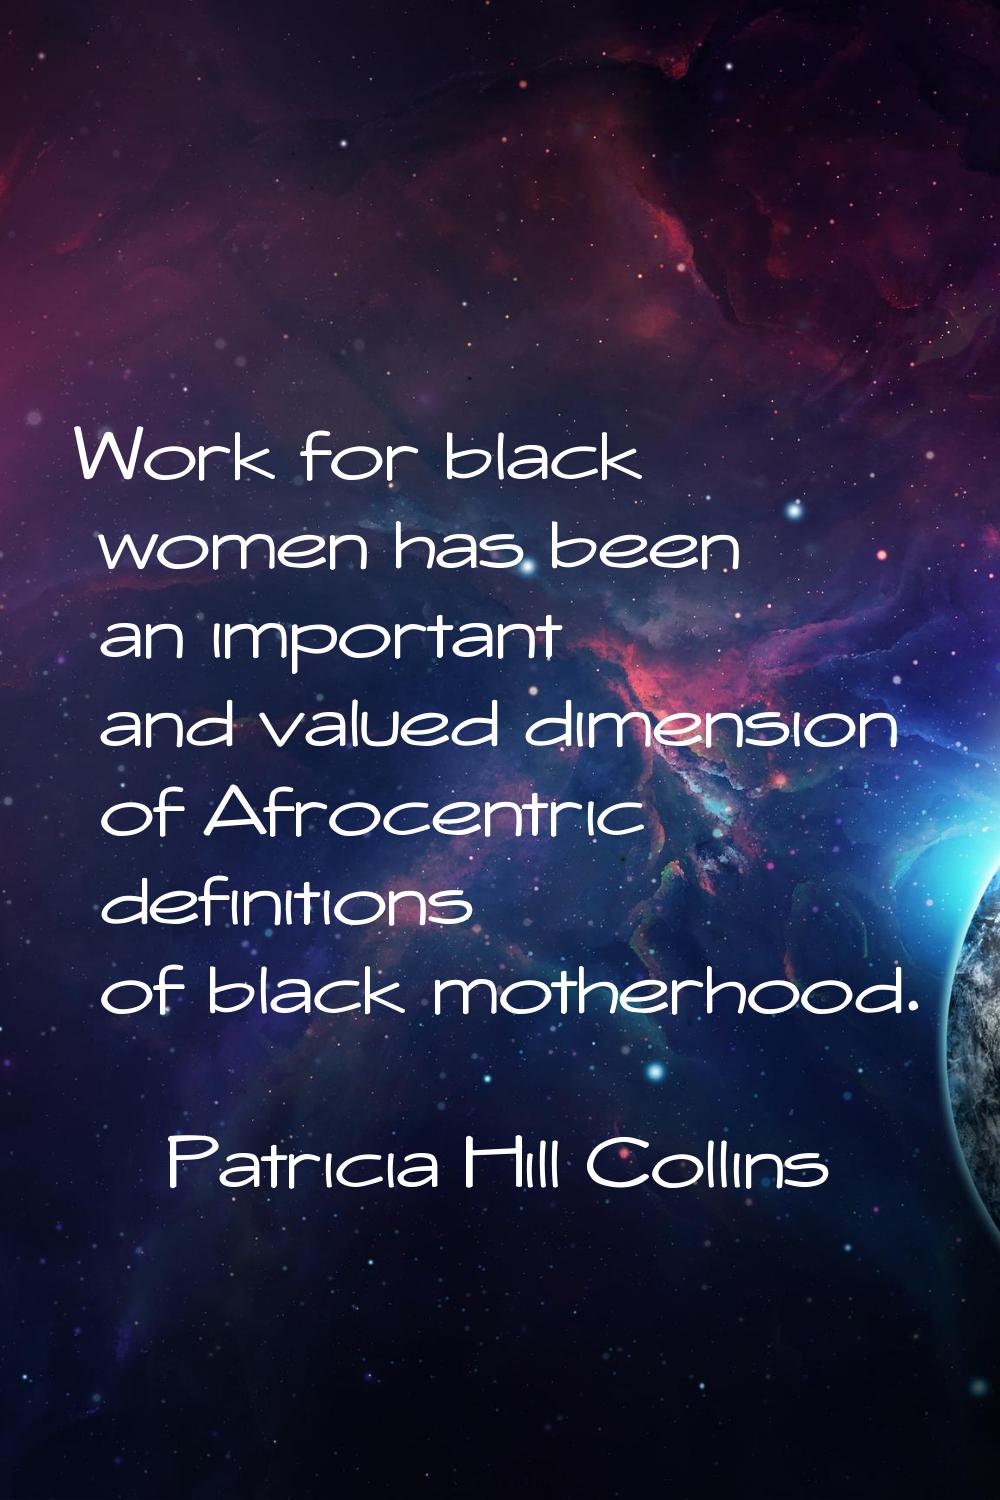 Work for black women has been an important and valued dimension of Afrocentric definitions of black